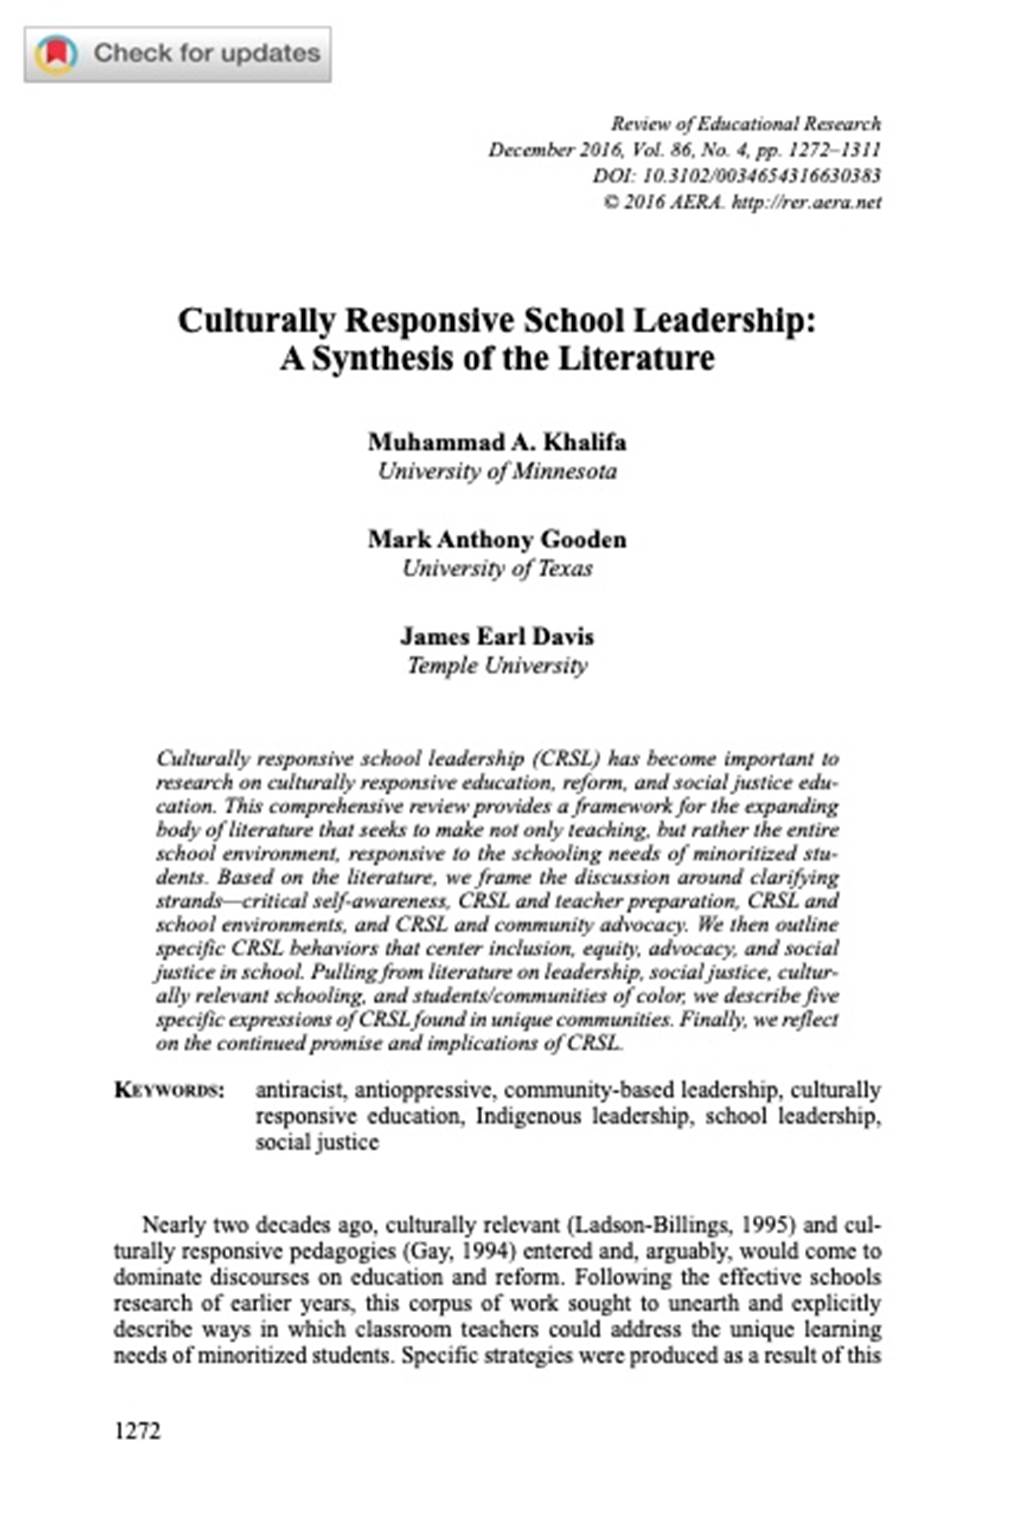 Culturally Responsive School Leadership: A Synthesis of the Literature - Document image